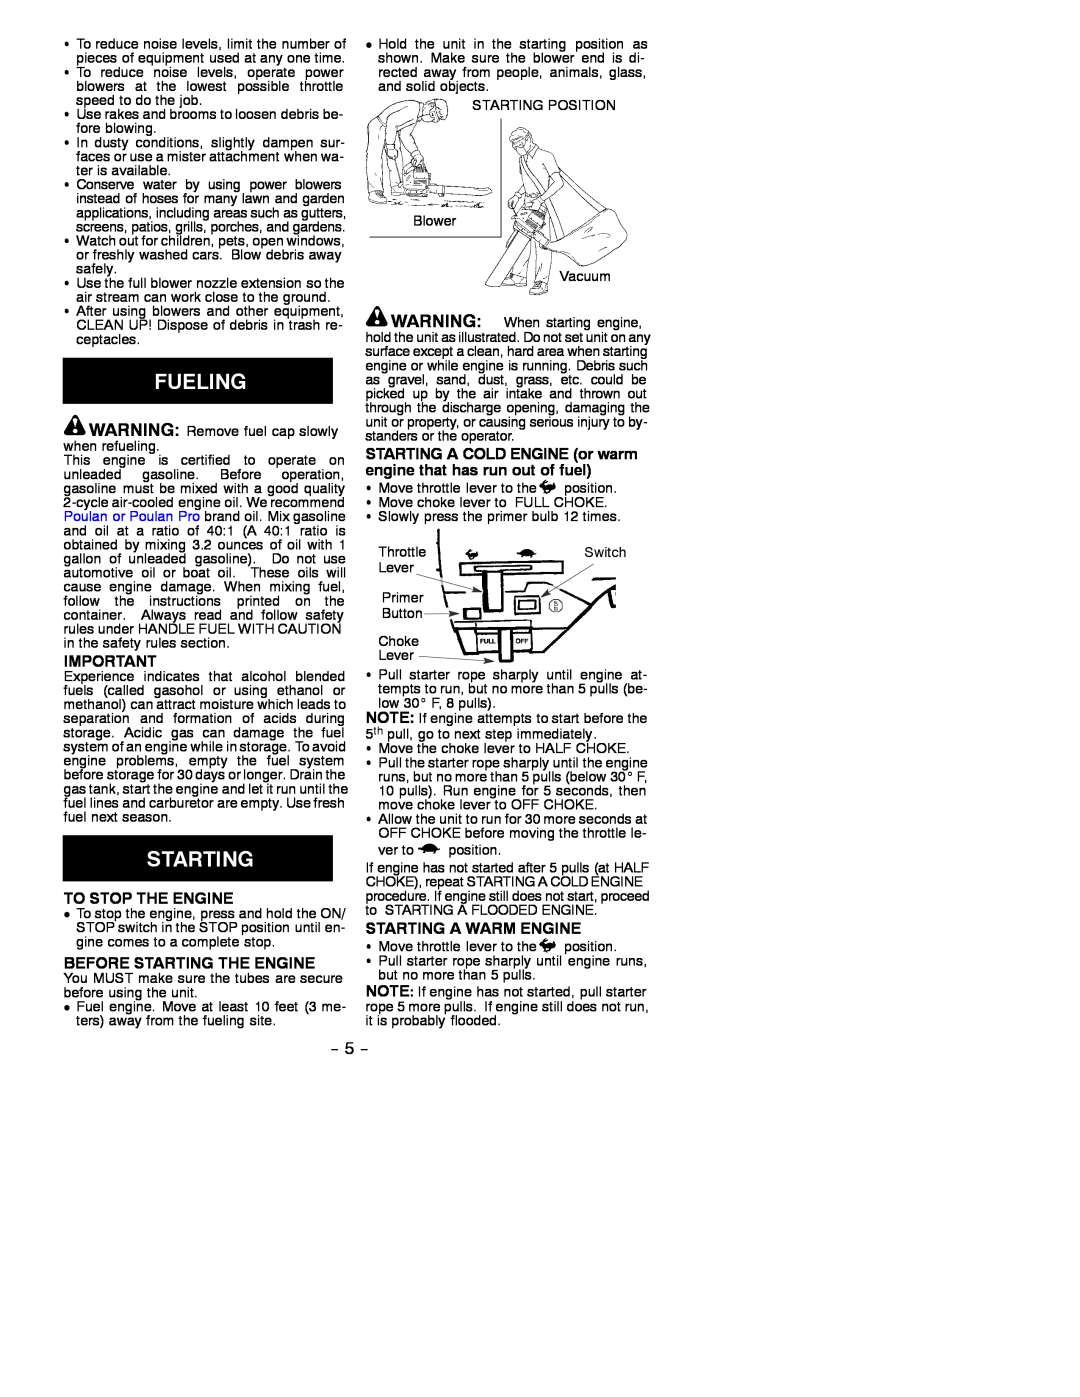 Poulan 530088741 instruction manual To Stop The Engine, Before Starting The Engine, Starting A Warm Engine 